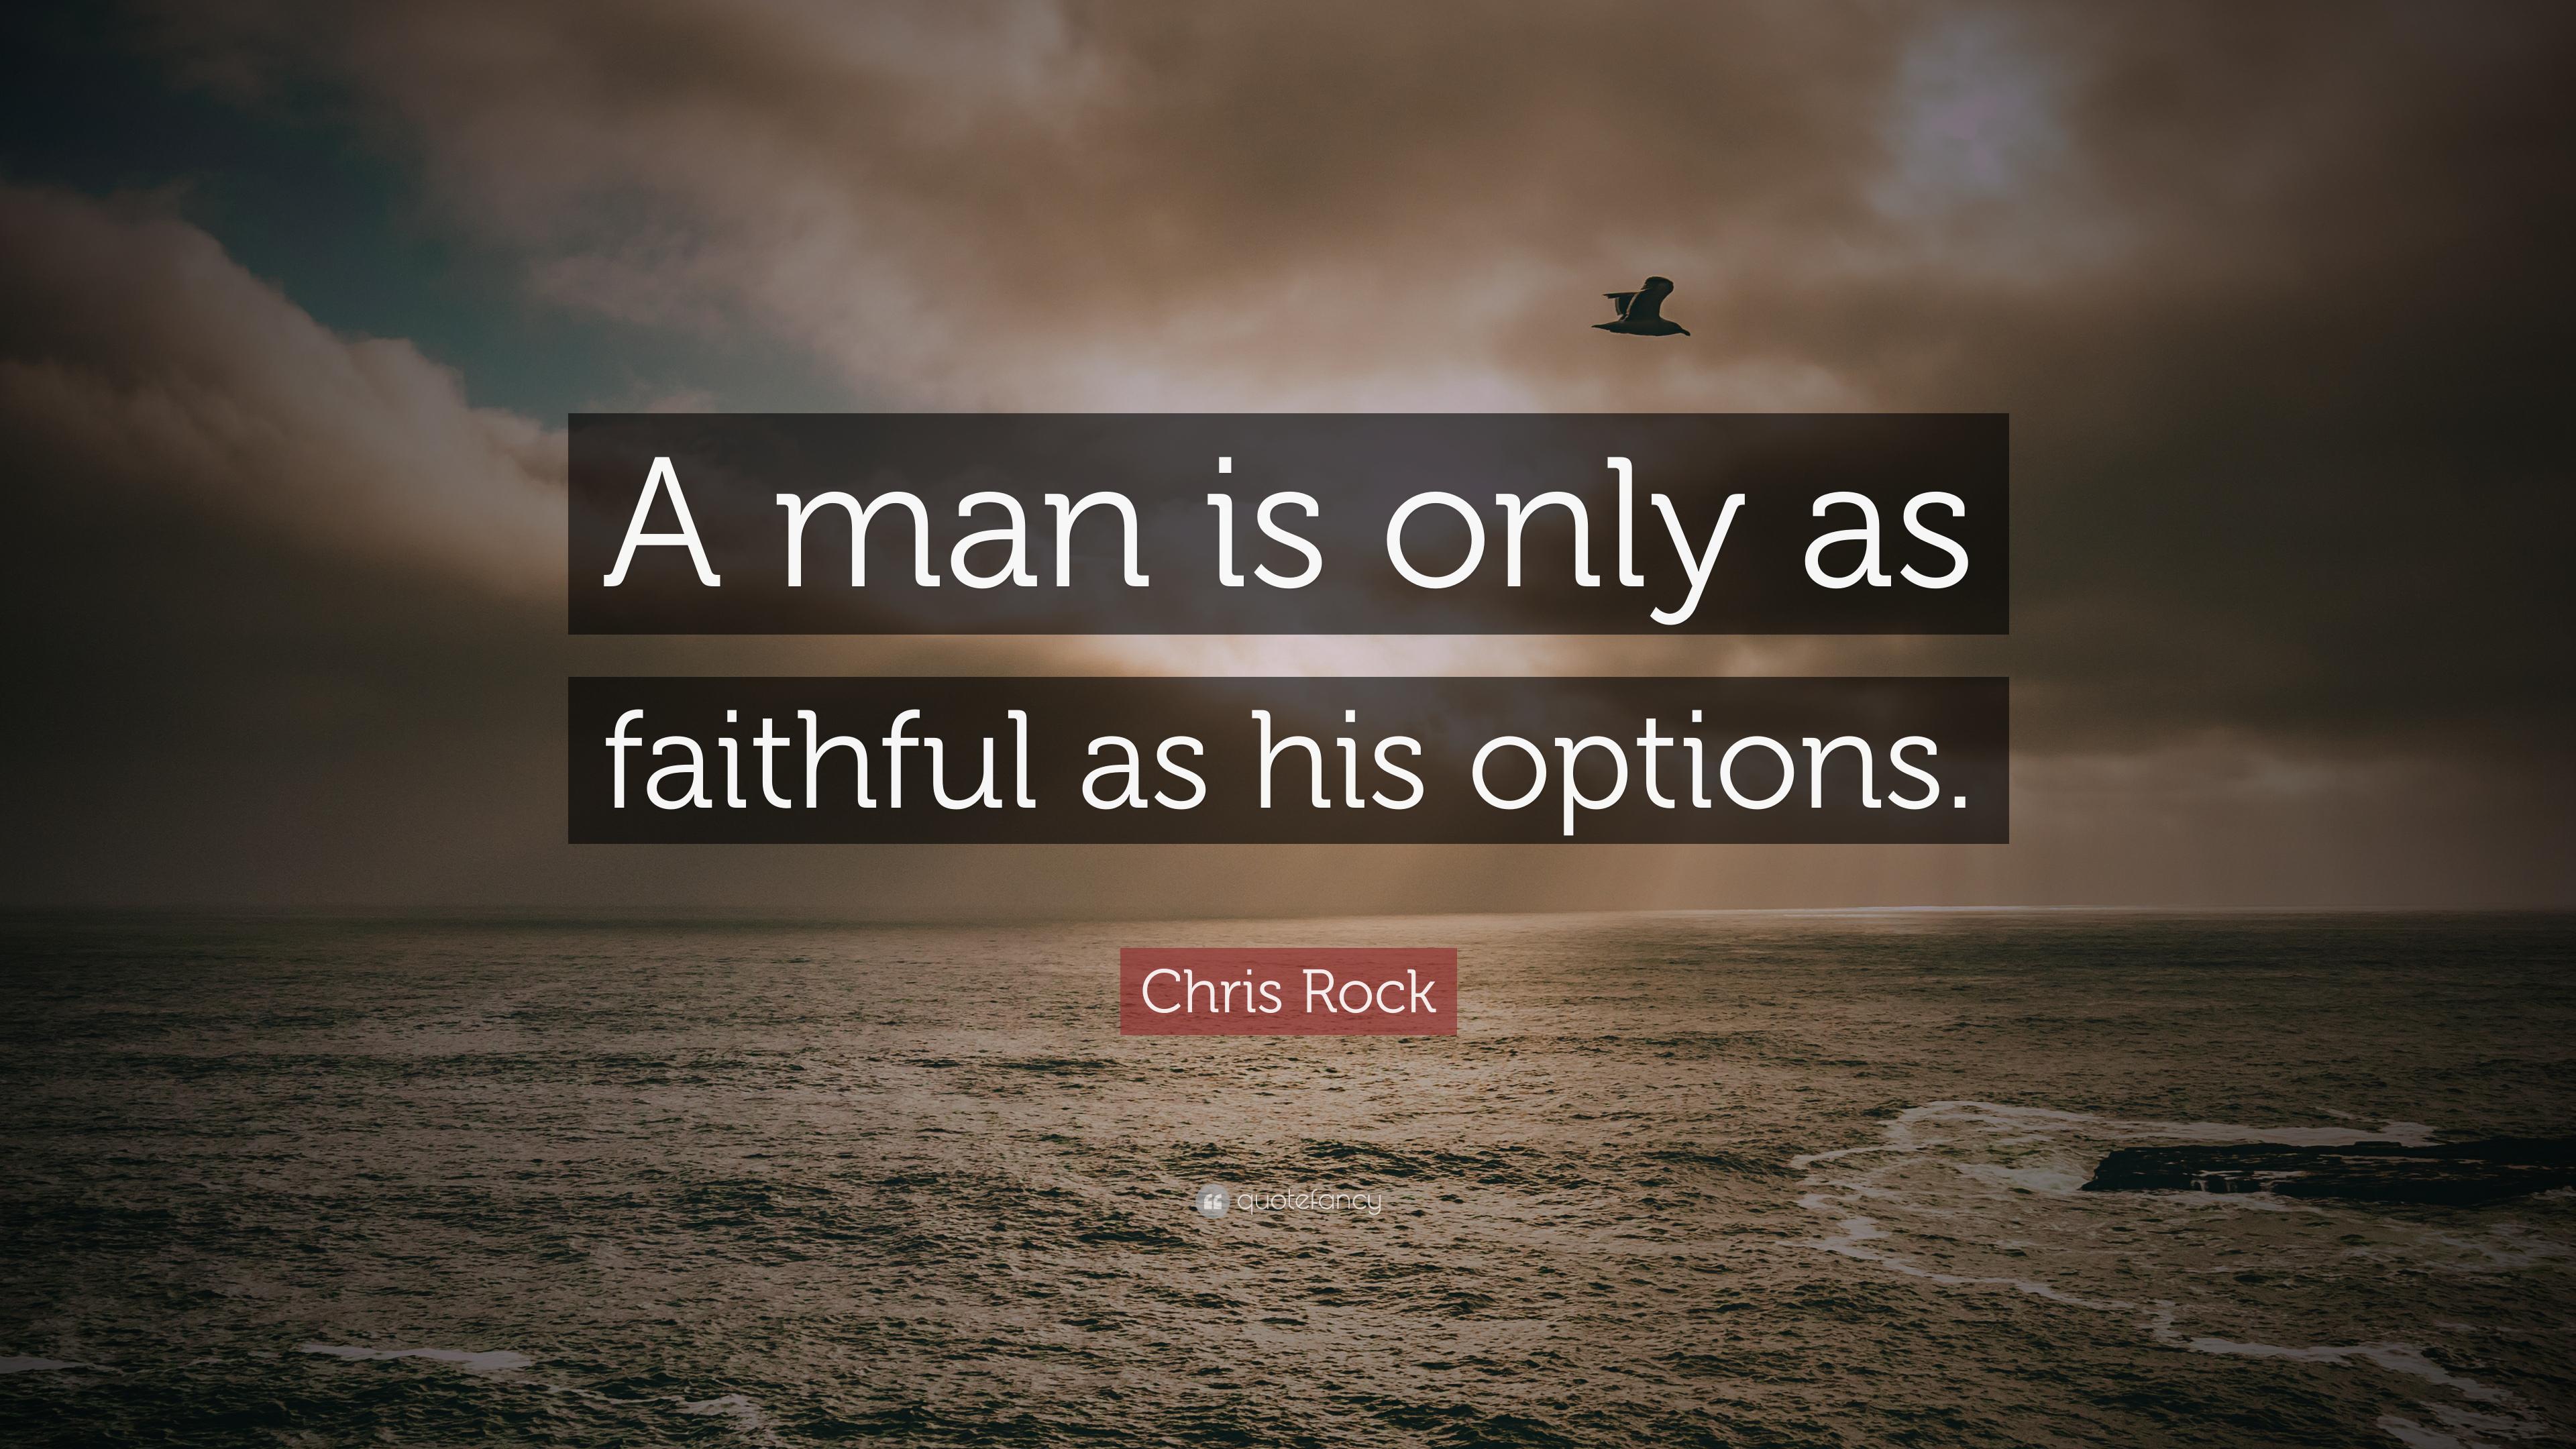 Chris Rock Quote: “A man is only as faithful as his options